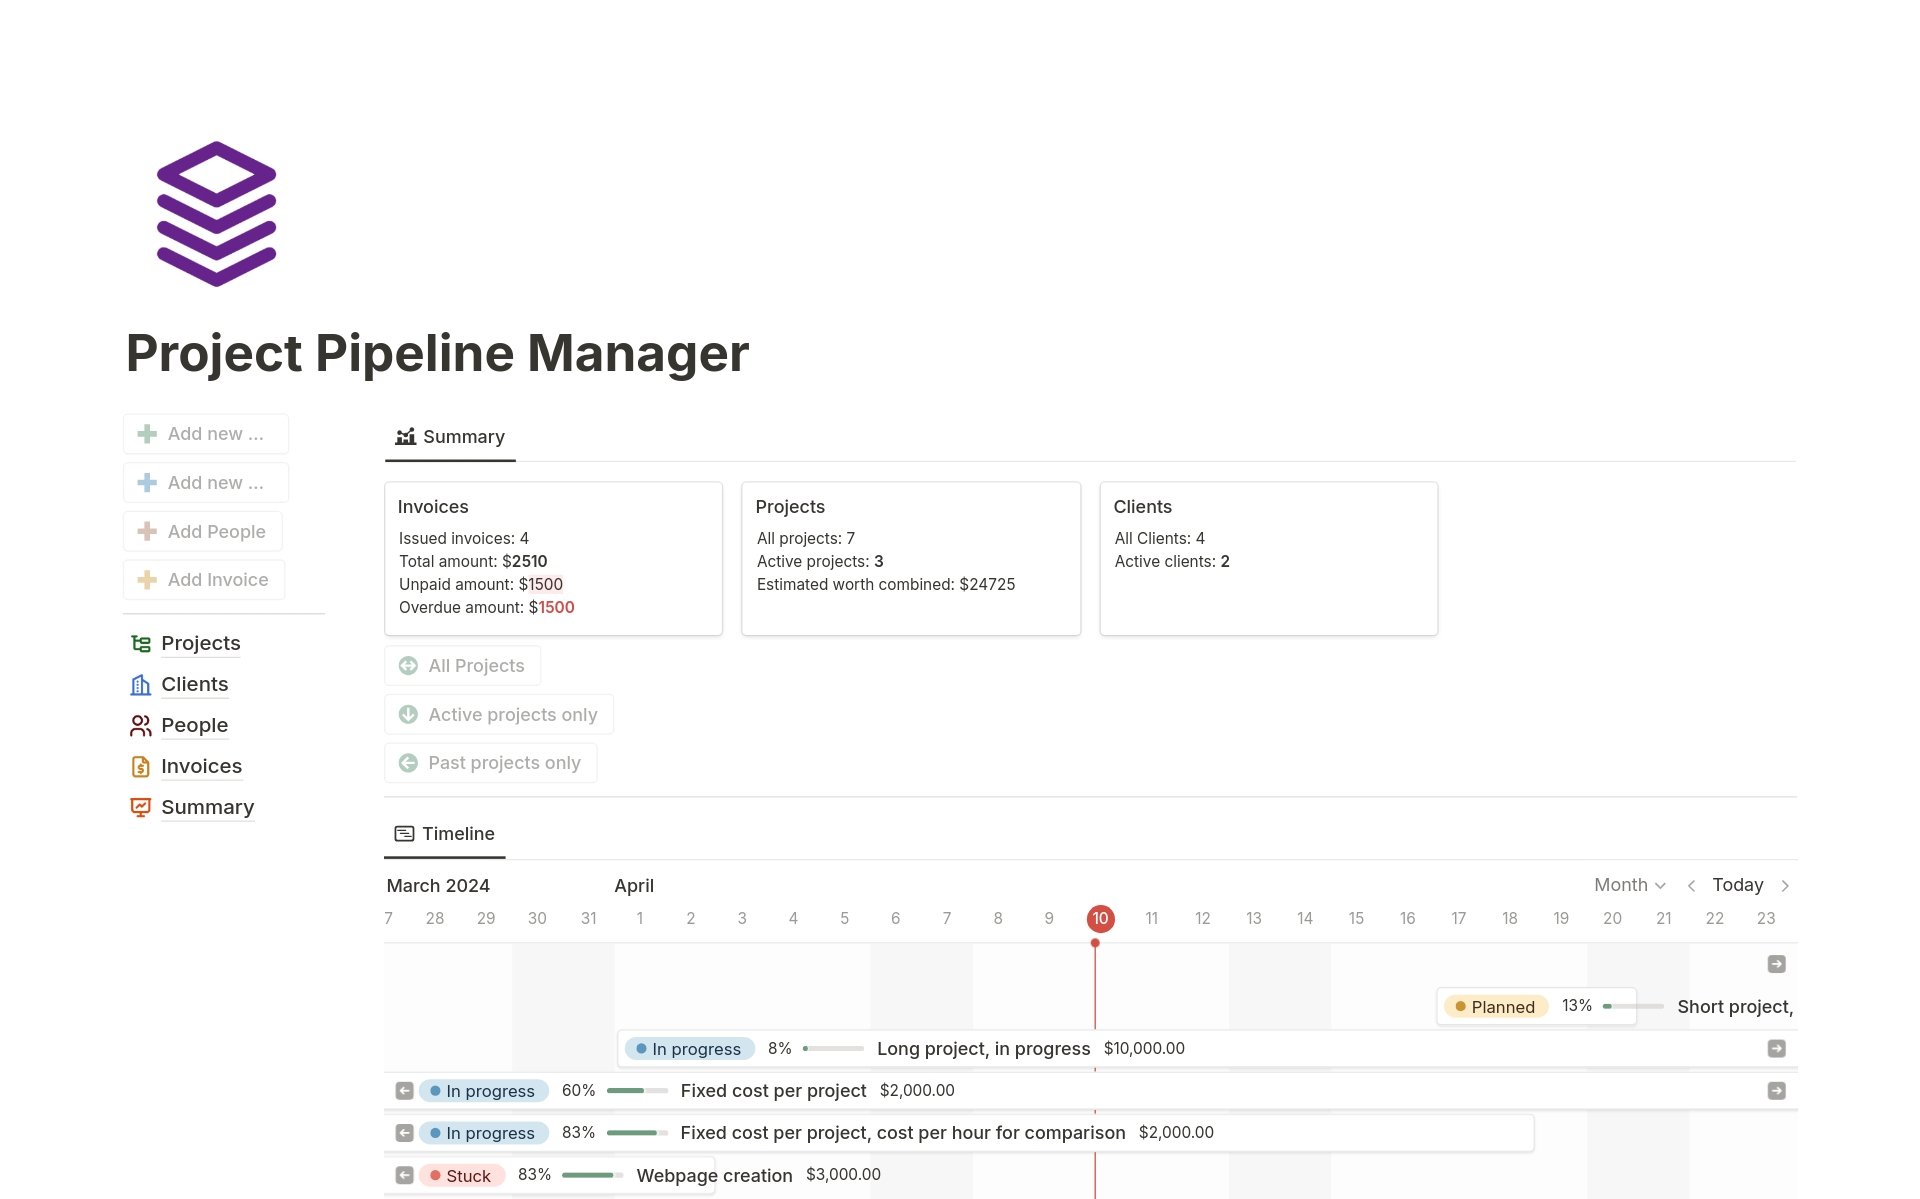 Project Pipeline Manager is A Notion template designed to help freelancers, agencies, and other service providers manage multiple projects efficiently. It offers a clear overview of projects and a simple financial tracking.